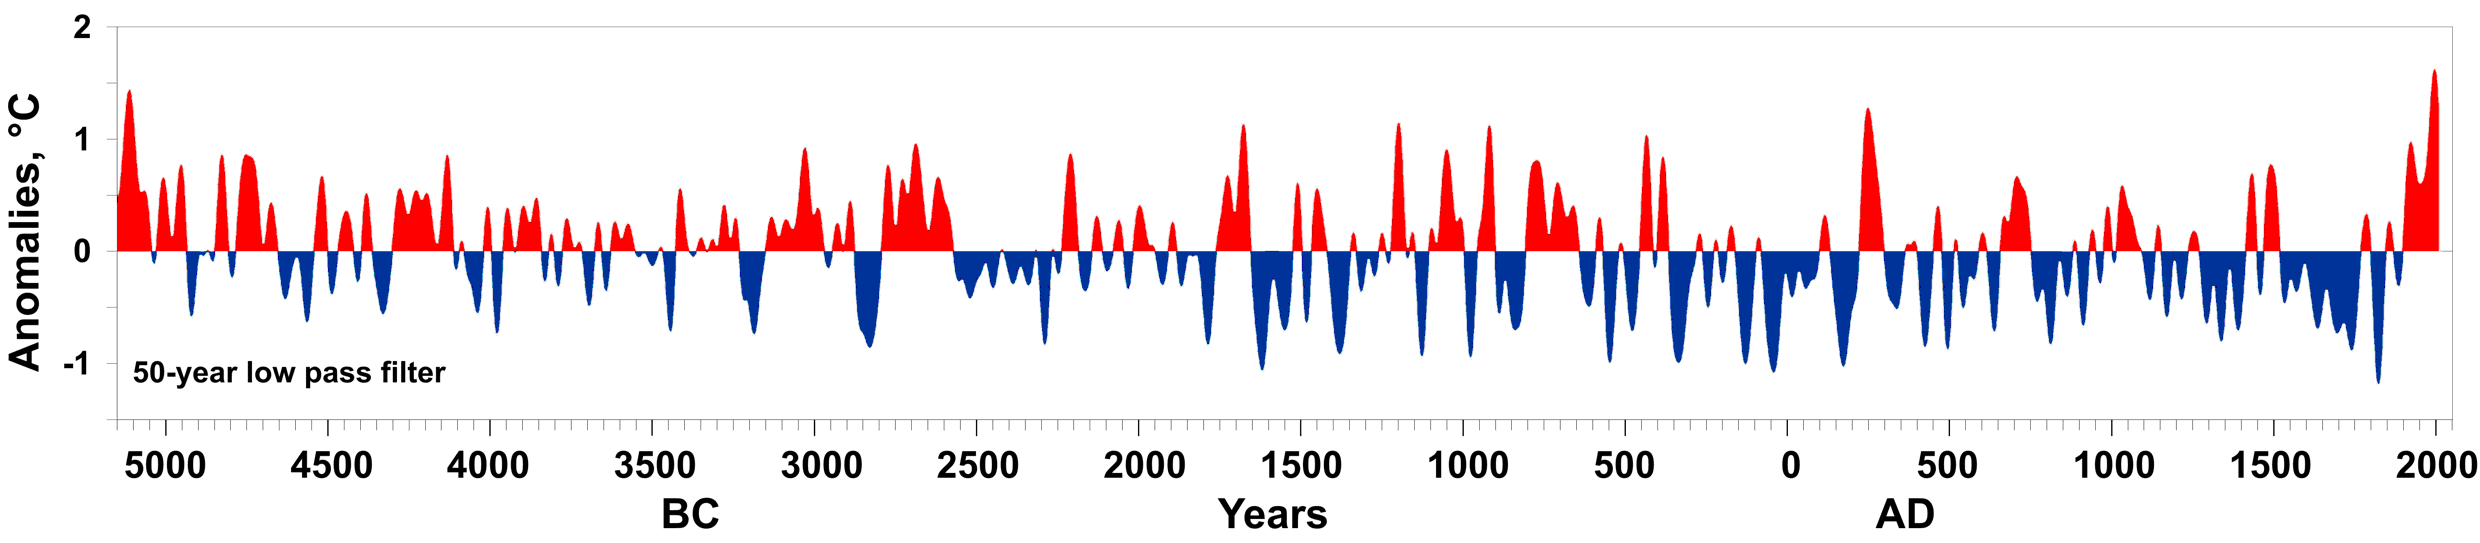 Tree ring data from last 7000 years showing average summer highs and lows fluctuating around a mean. Last few hundred years are slightly higher than normal.